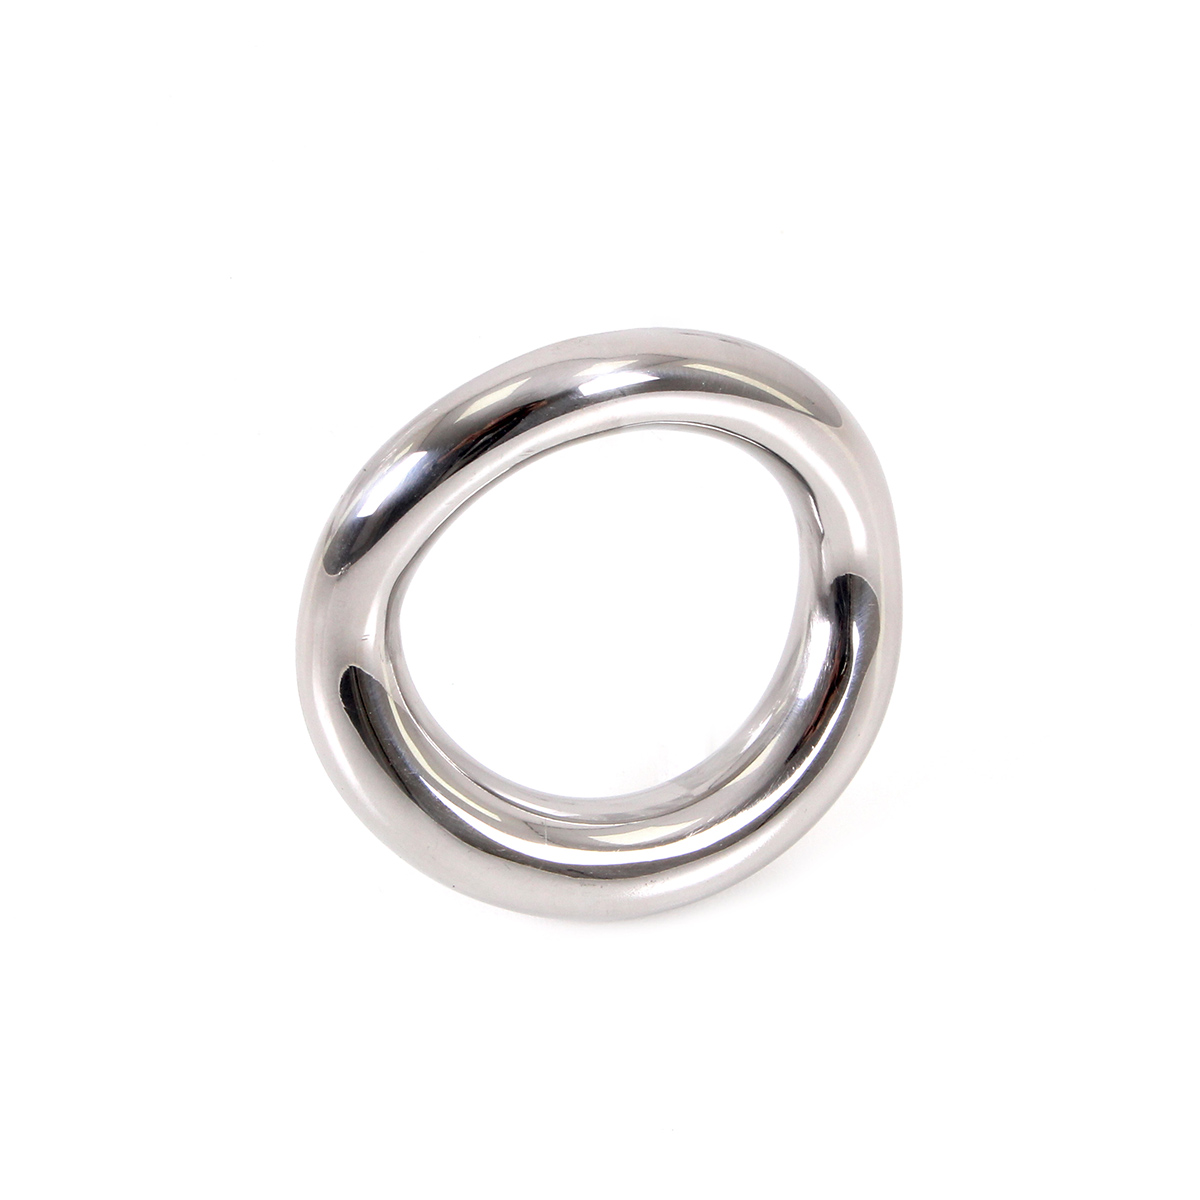 Costum-Fit-Cockring-40-mm-OPR-277044-2